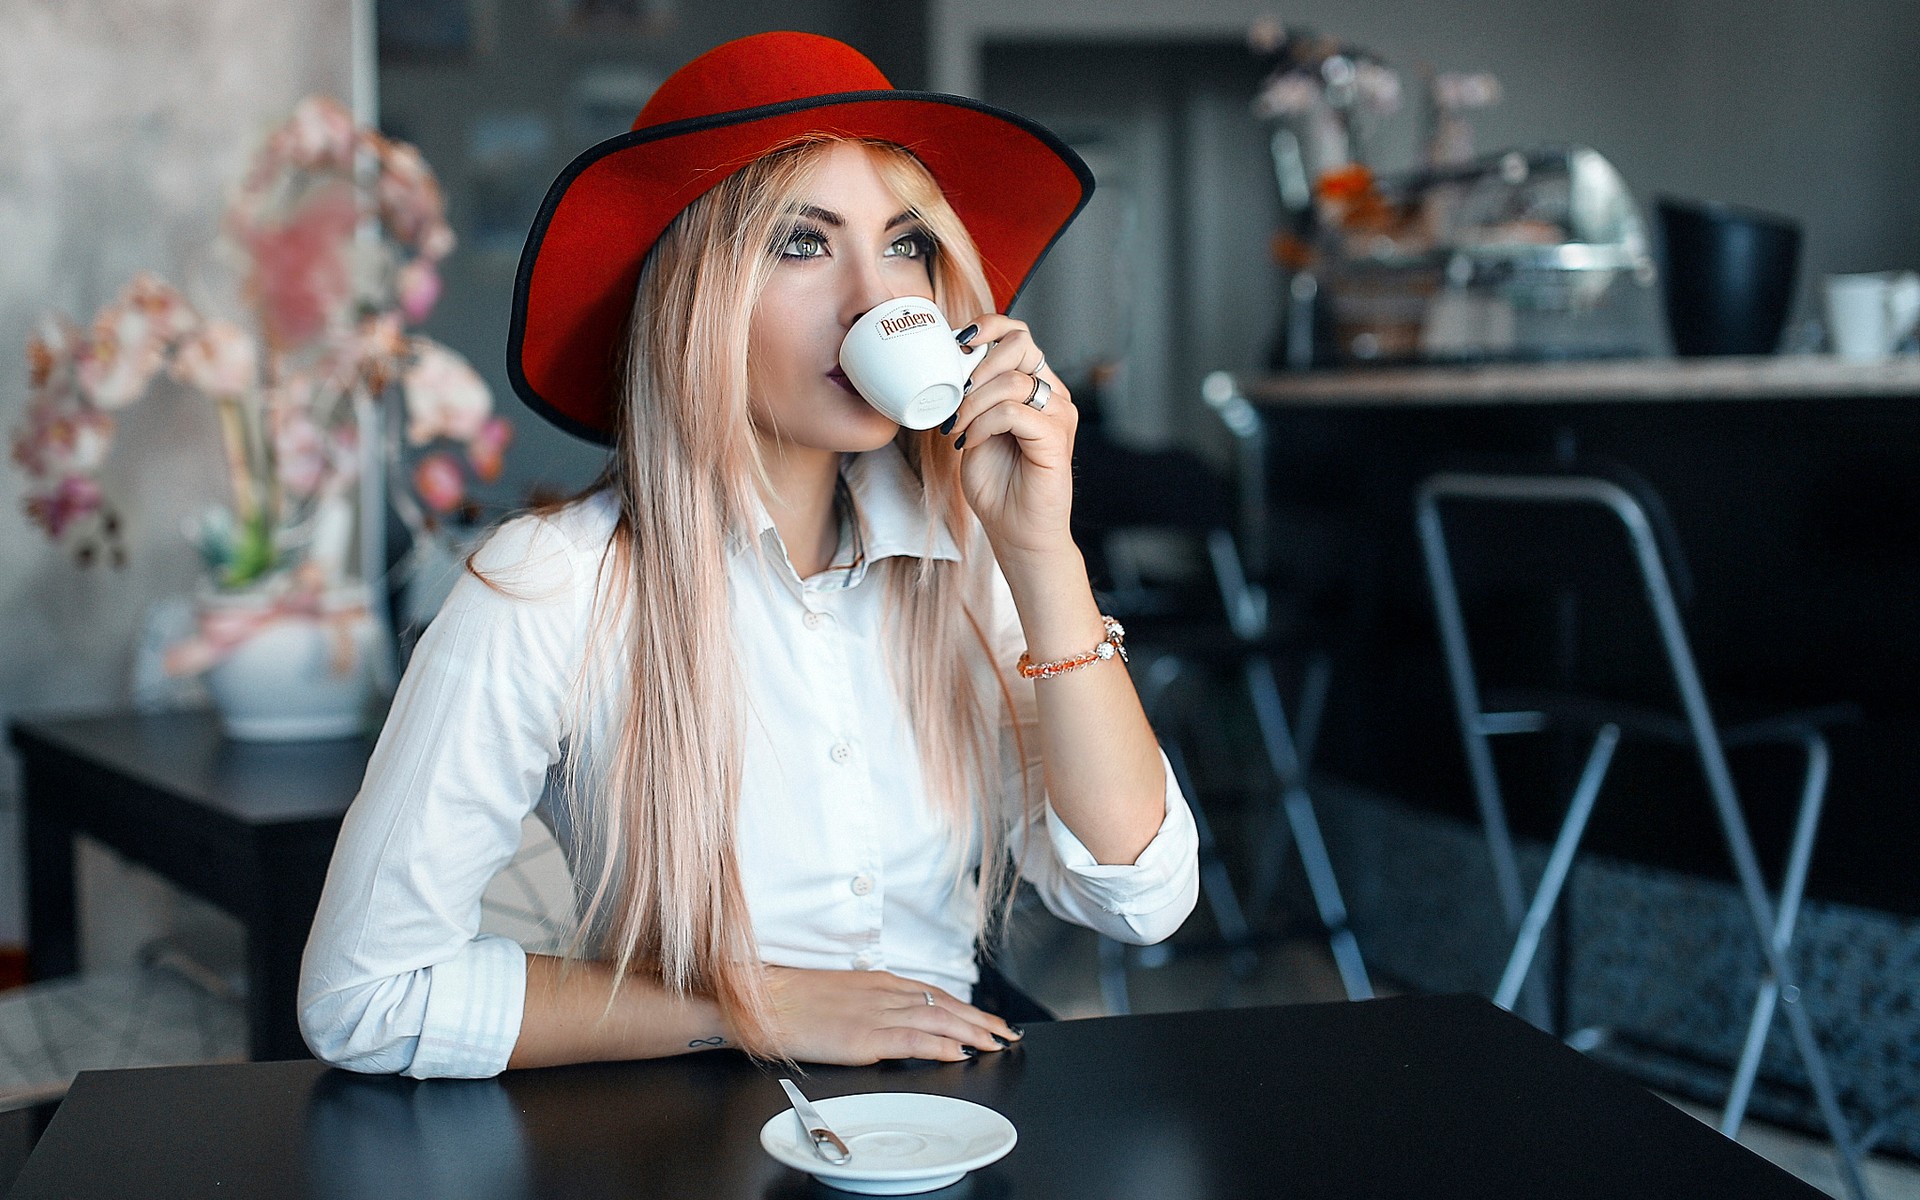 People 1920x1200 women model blonde long hair cafeteria  coffee sitting drink cup table hat blouses tattoo makeup rings flowers depth of field women indoors indoors black nails painted nails women with hats